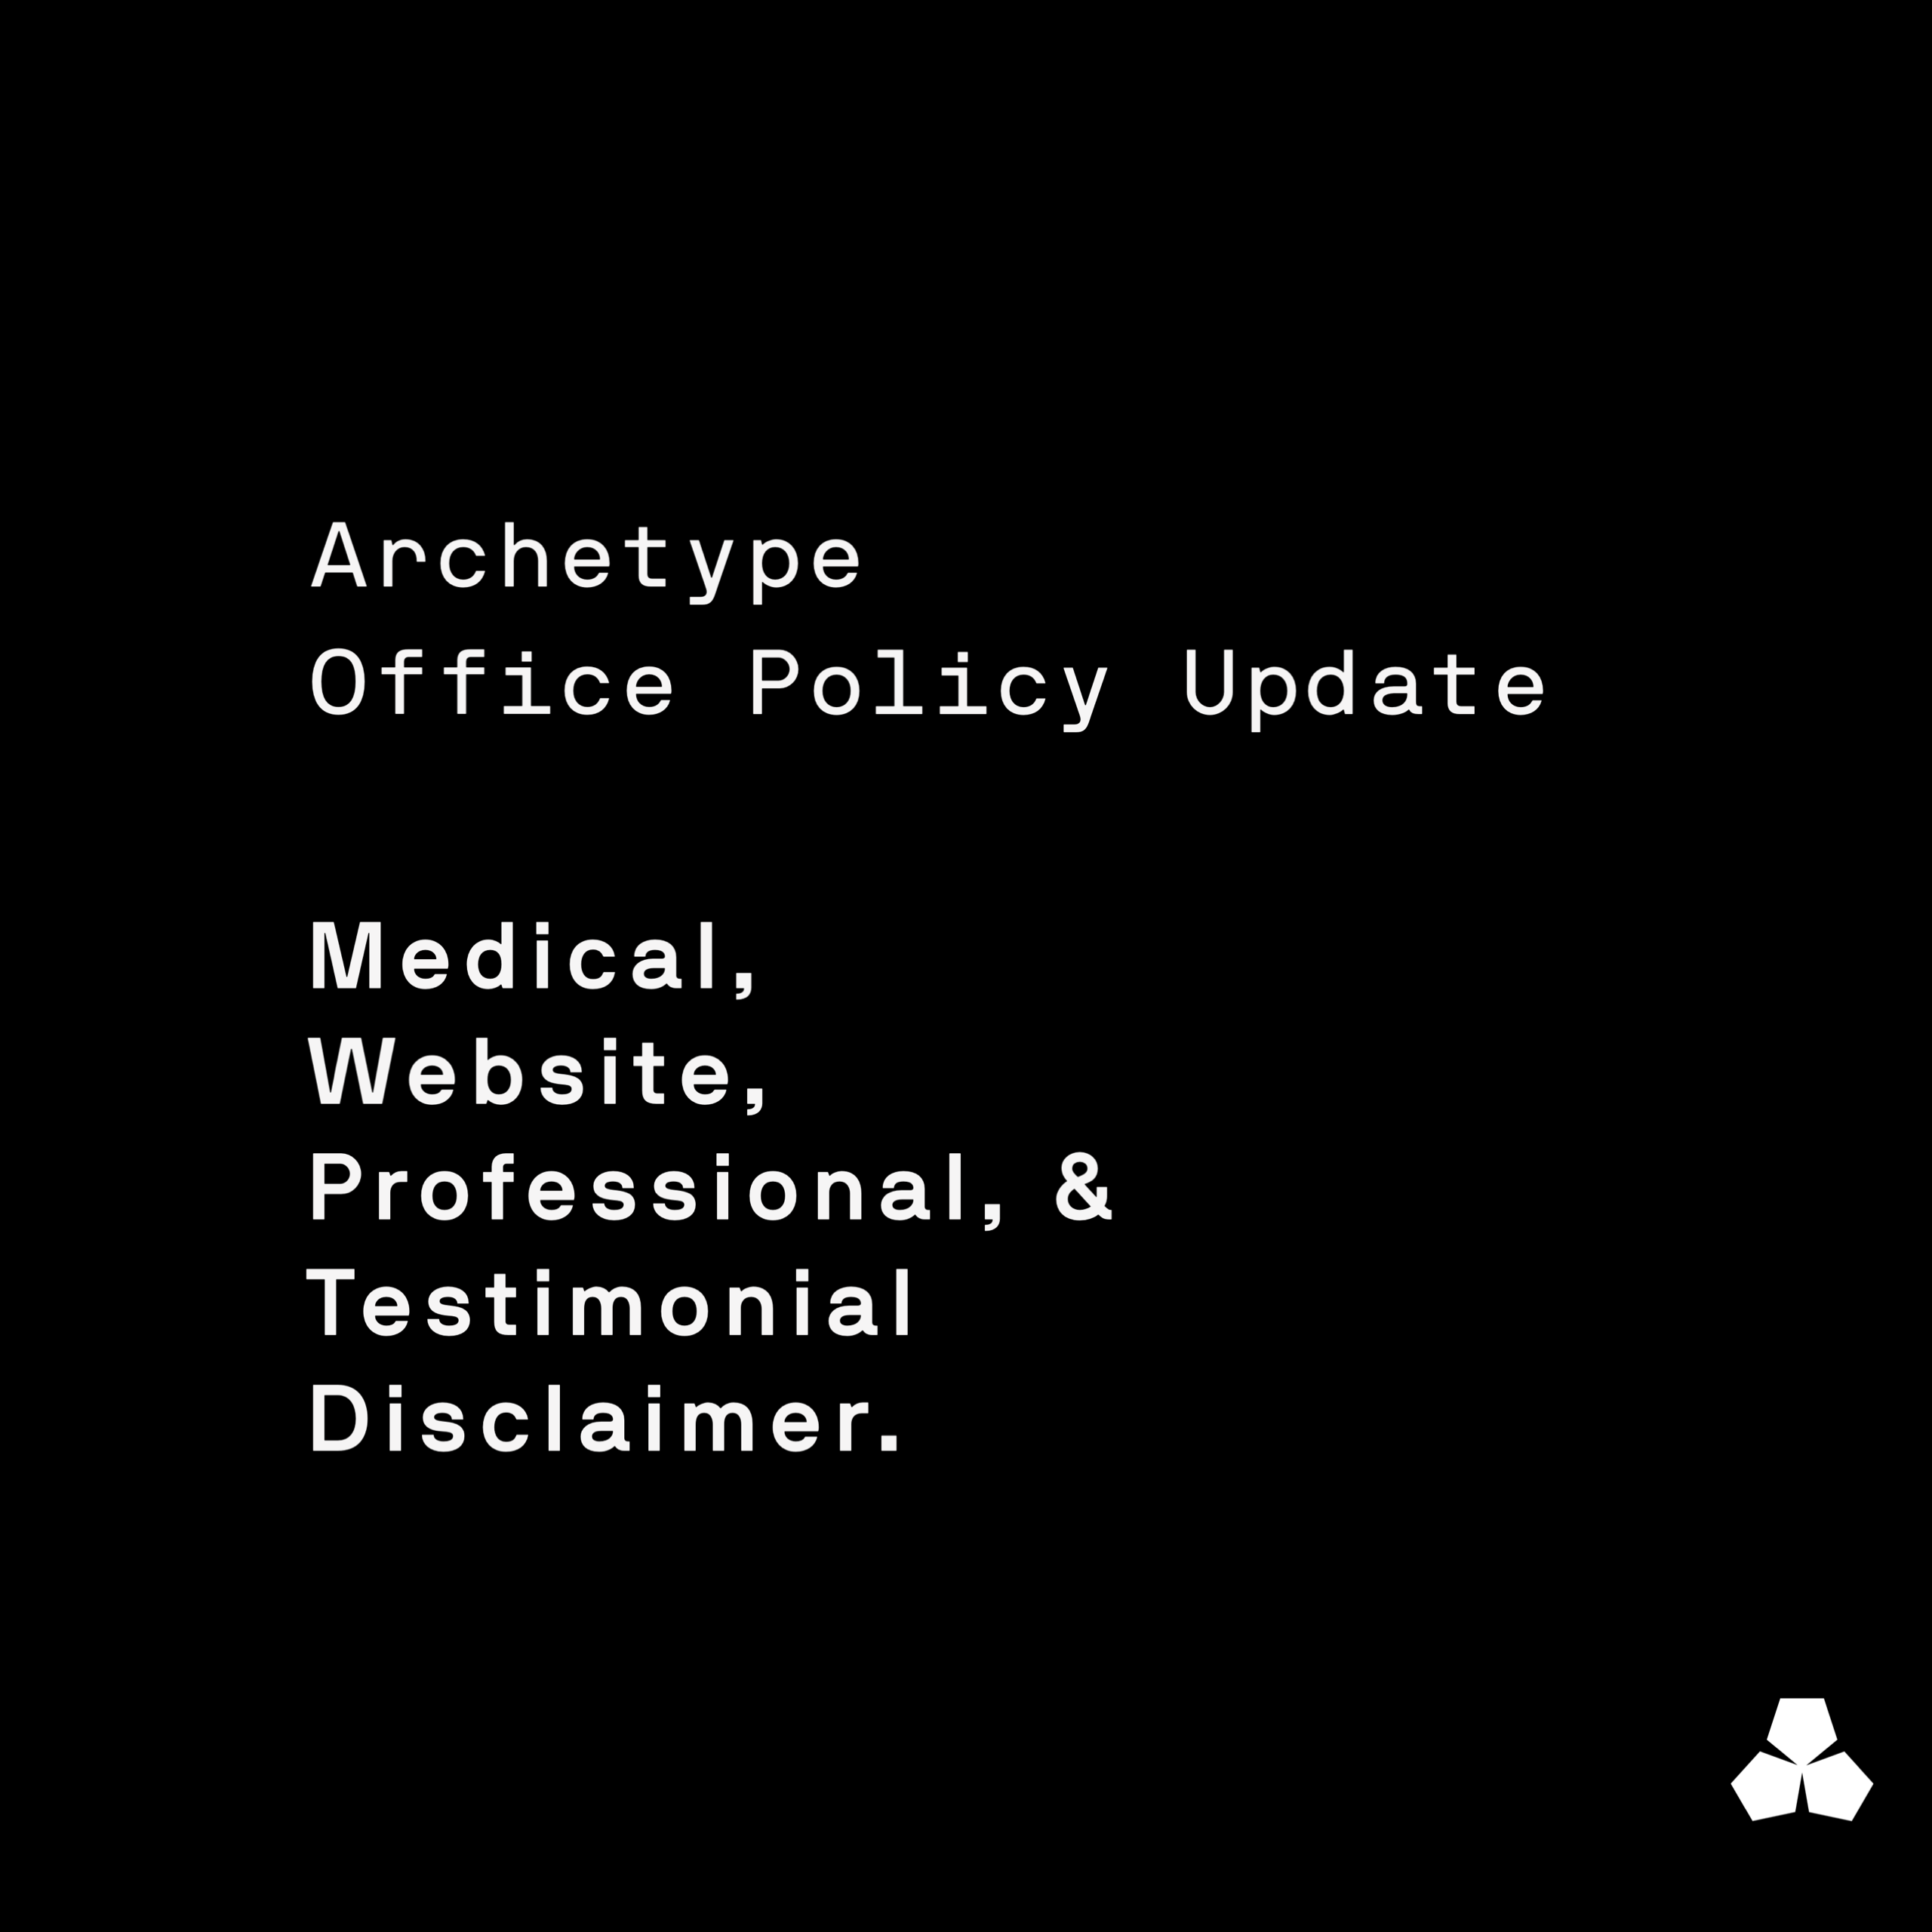 Archetype Disclaimer Update